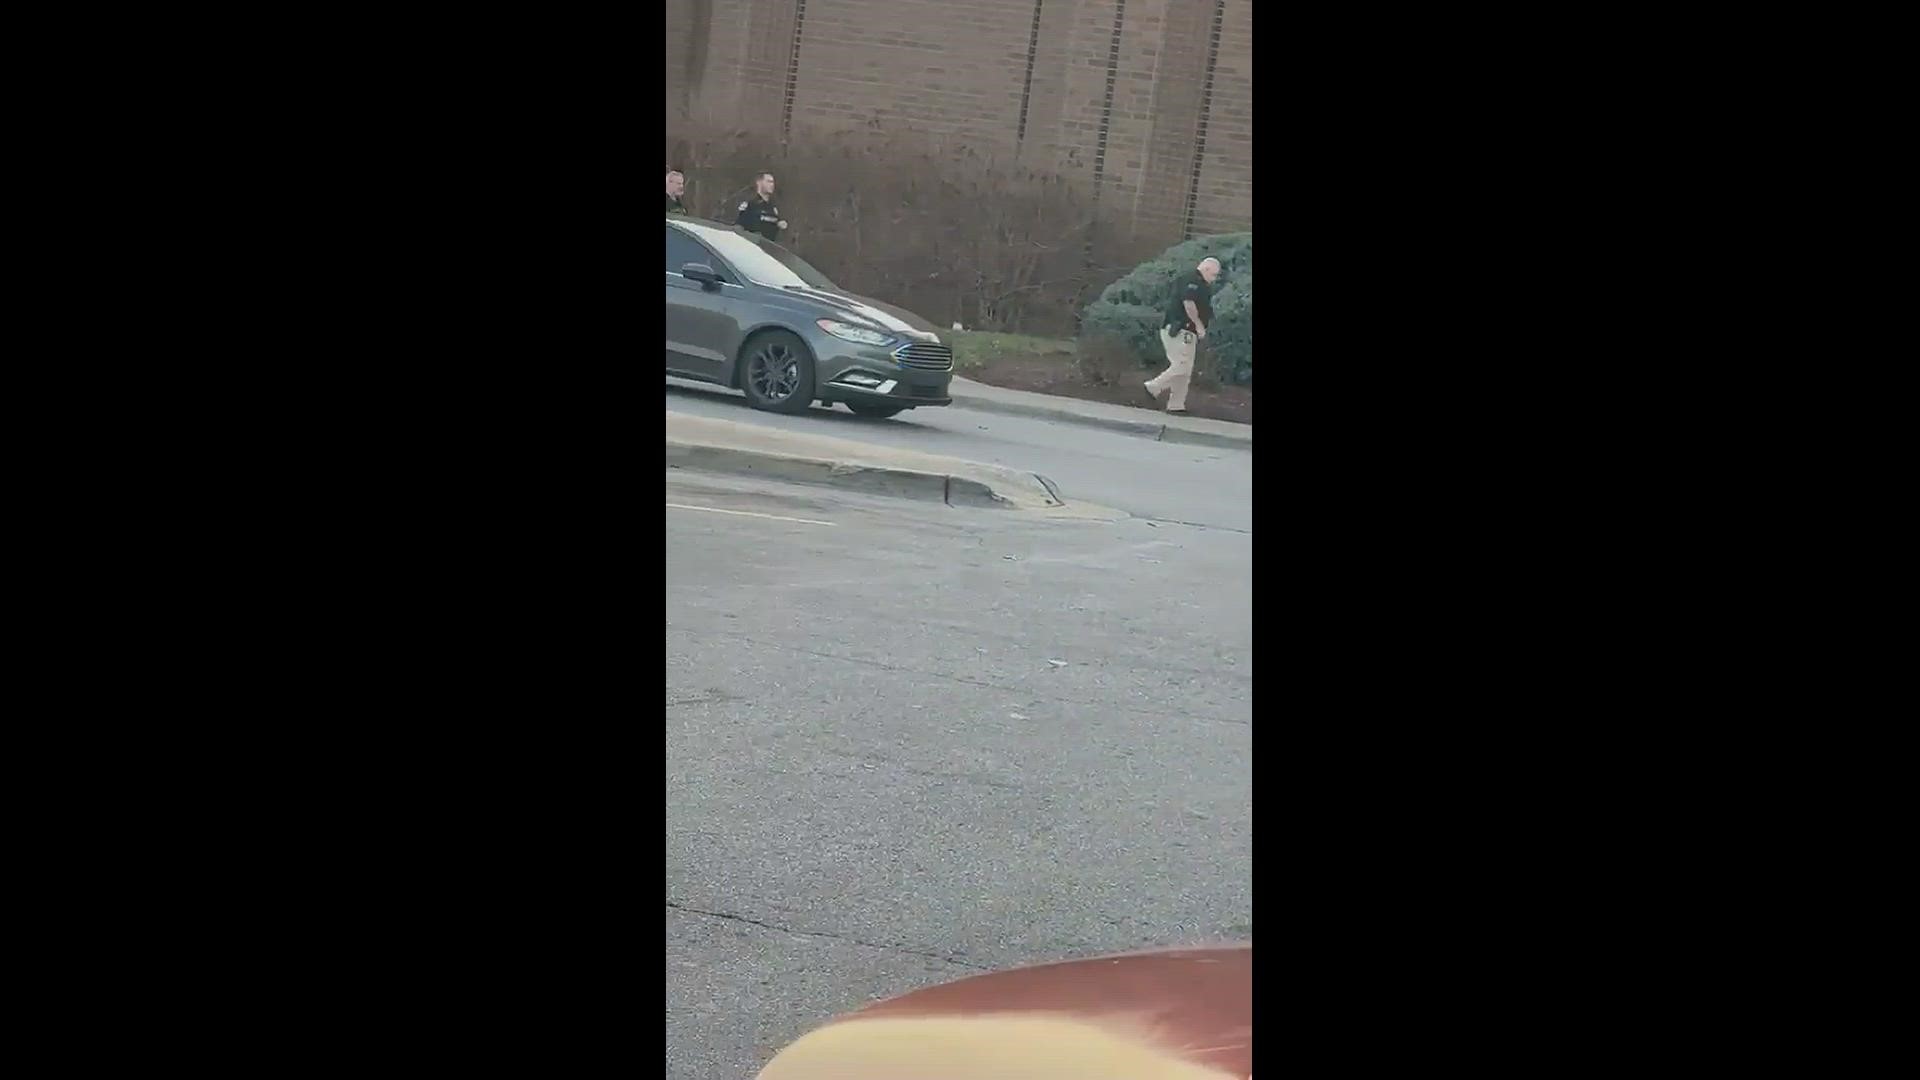 Video shows police armed with guns responding to incident at Jefferson Mall in Louisville on Dec. 12, 2022. // Courtesy of Austin Freeman